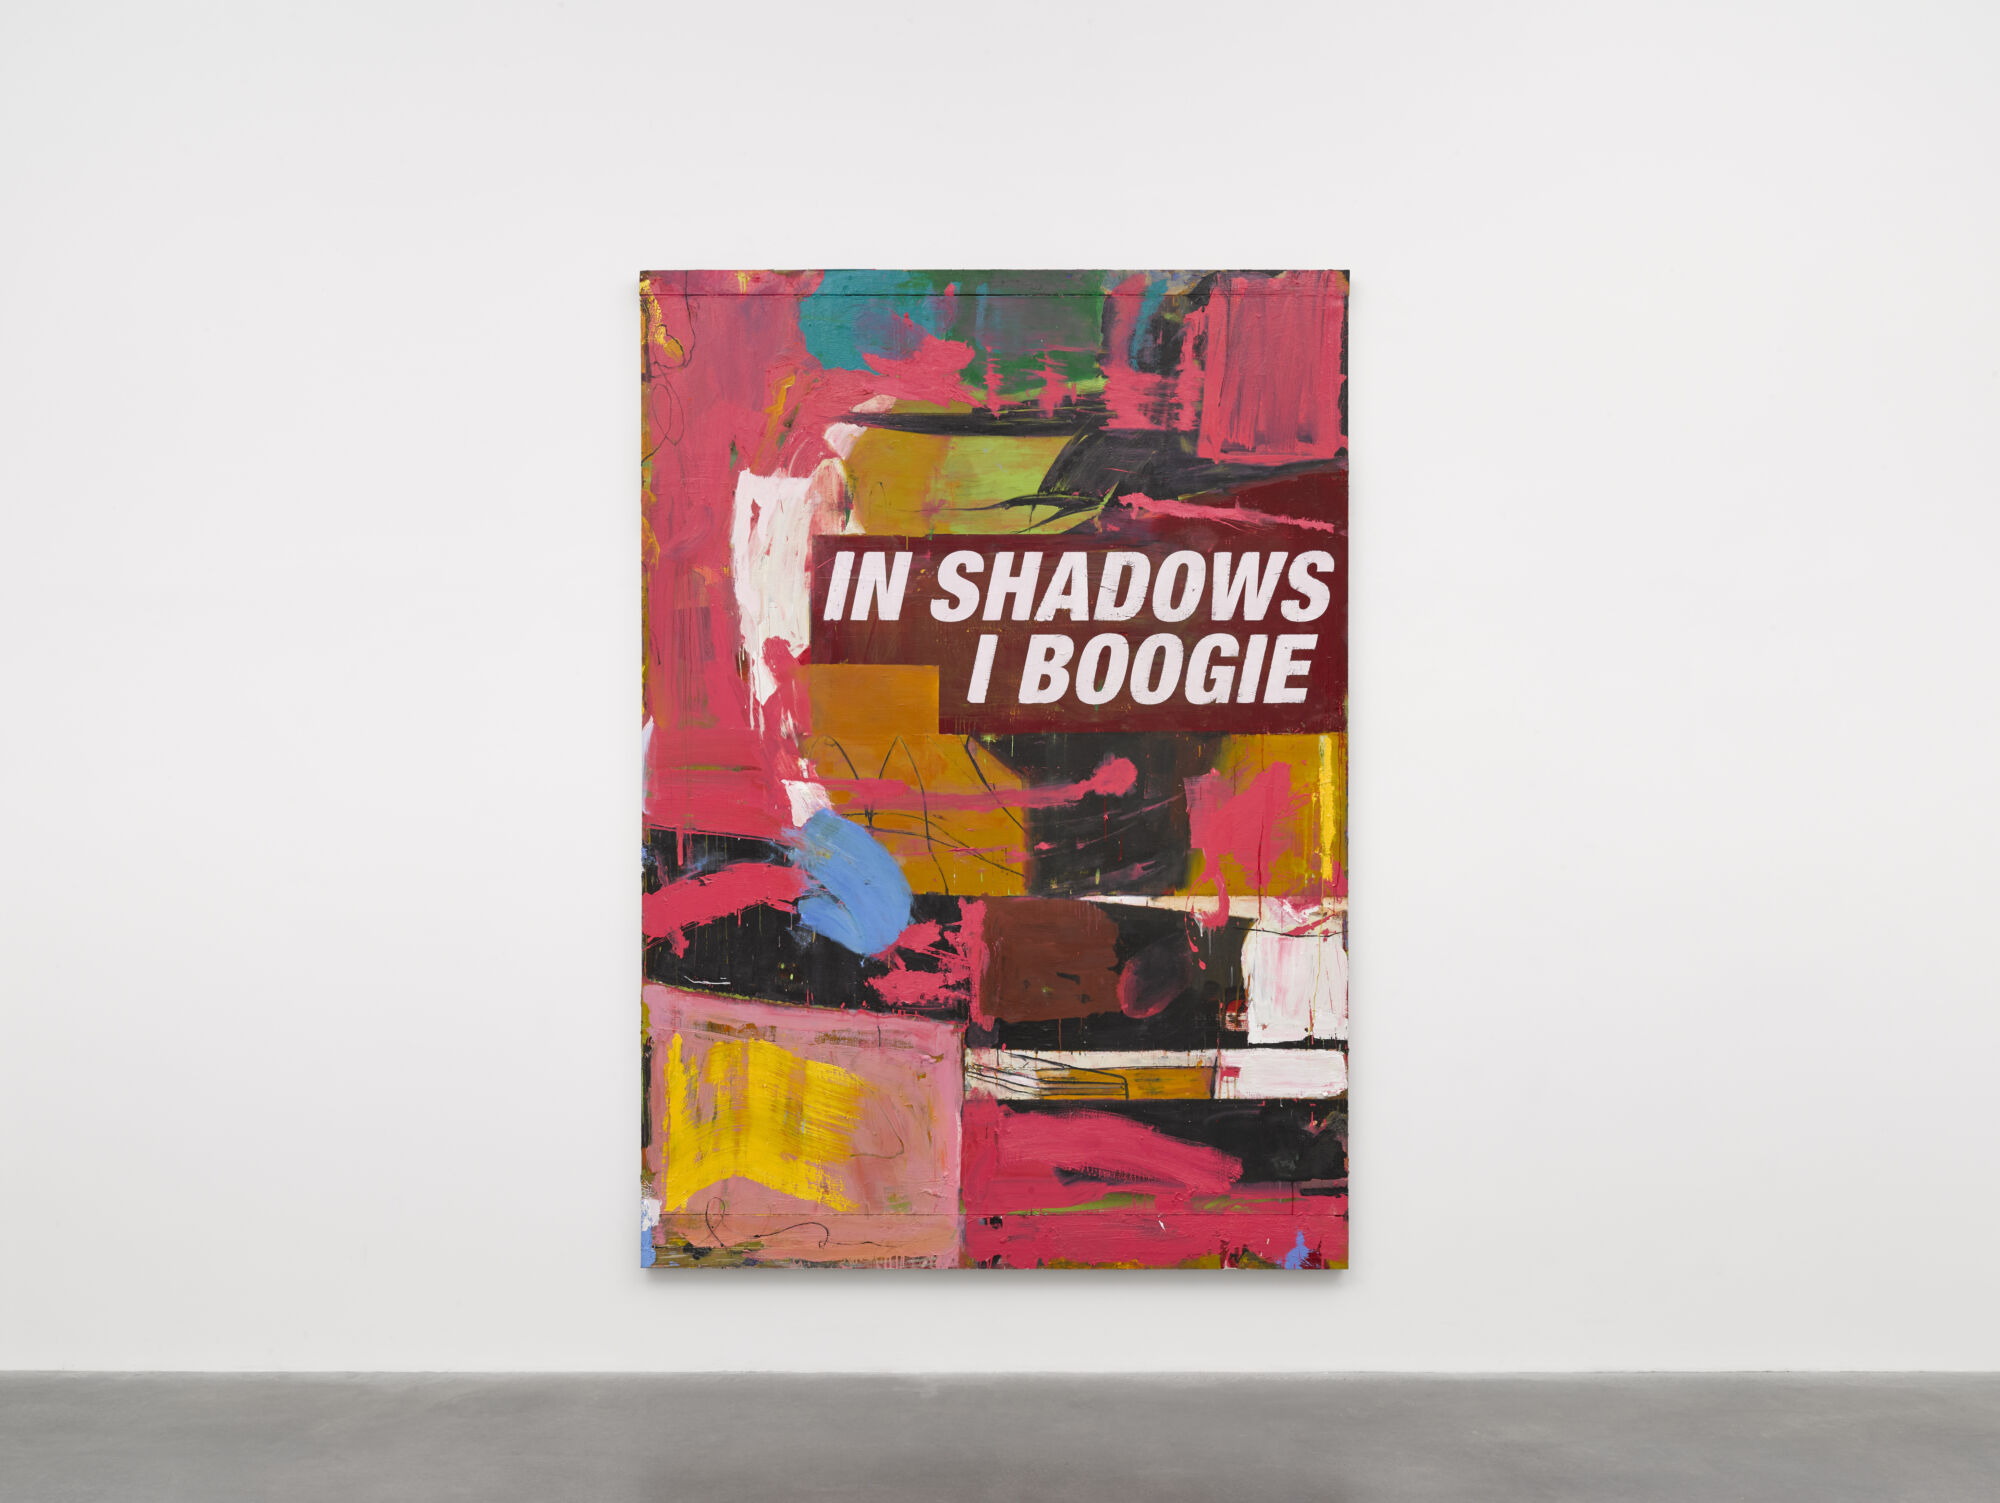 The Wick - Harland Miller,
In shadows I boogie
2022 © Harland Miller. Photo © White Cube (Theo Christelis)